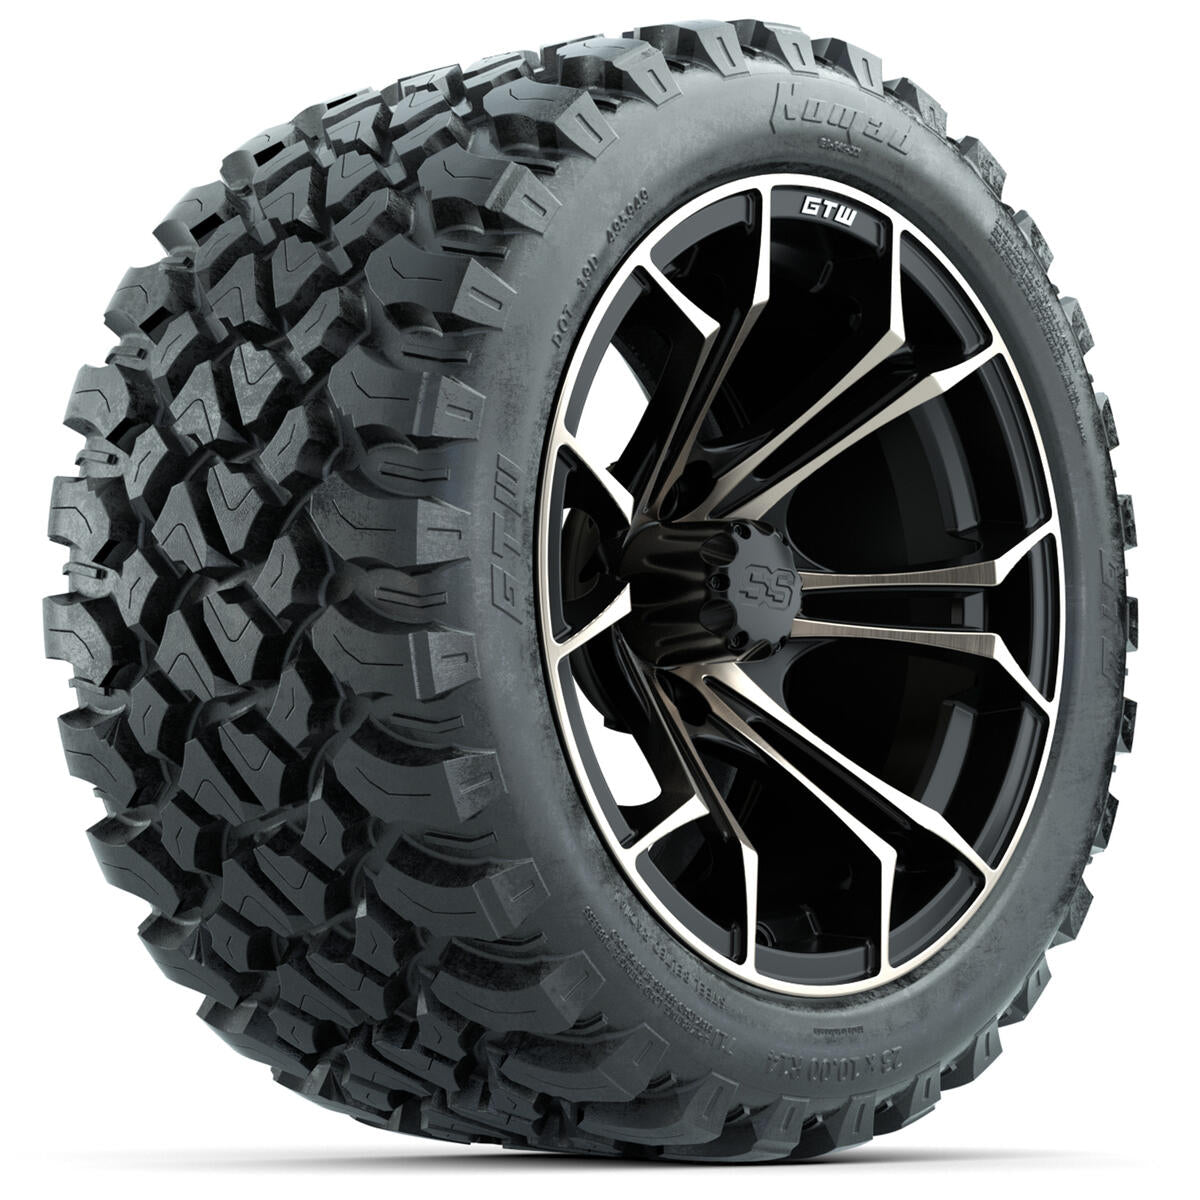 Set of 4 14"in GTW Spyder Wheels with 23x10-14"GTW Nomad All-Terrain Tires A19-737